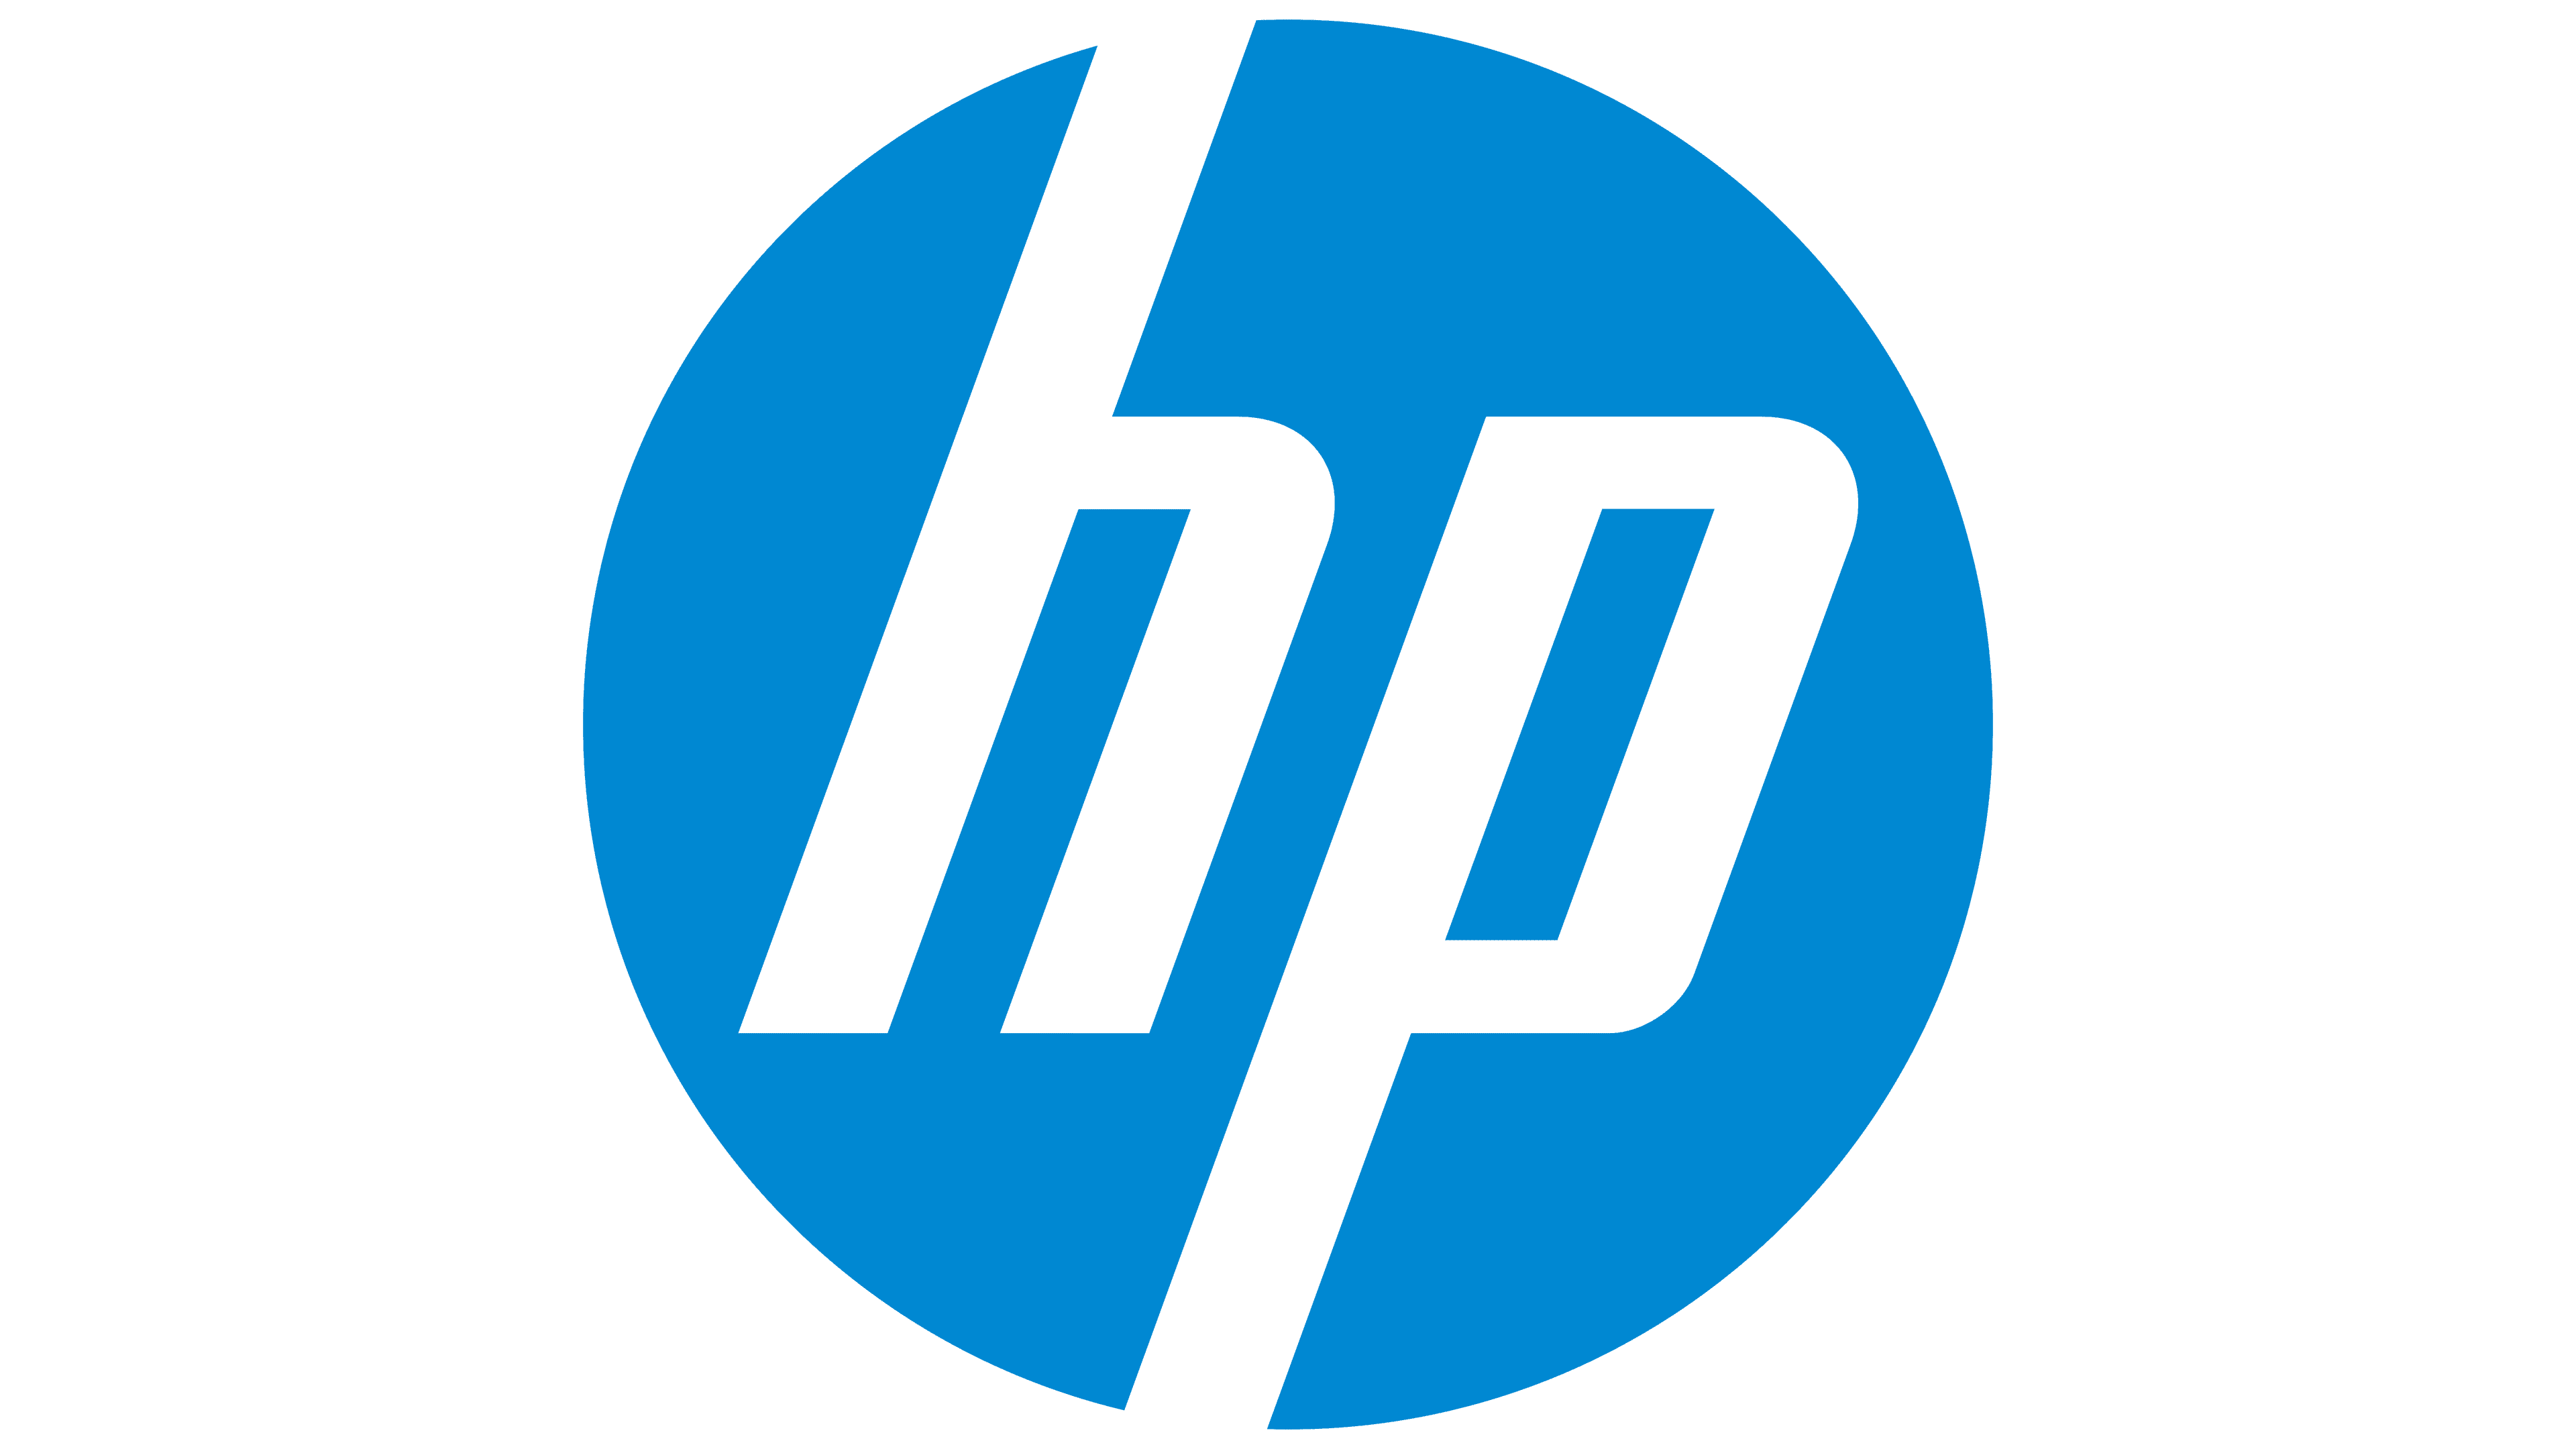 HP Logo, PNG, Symbol, History, Meaning